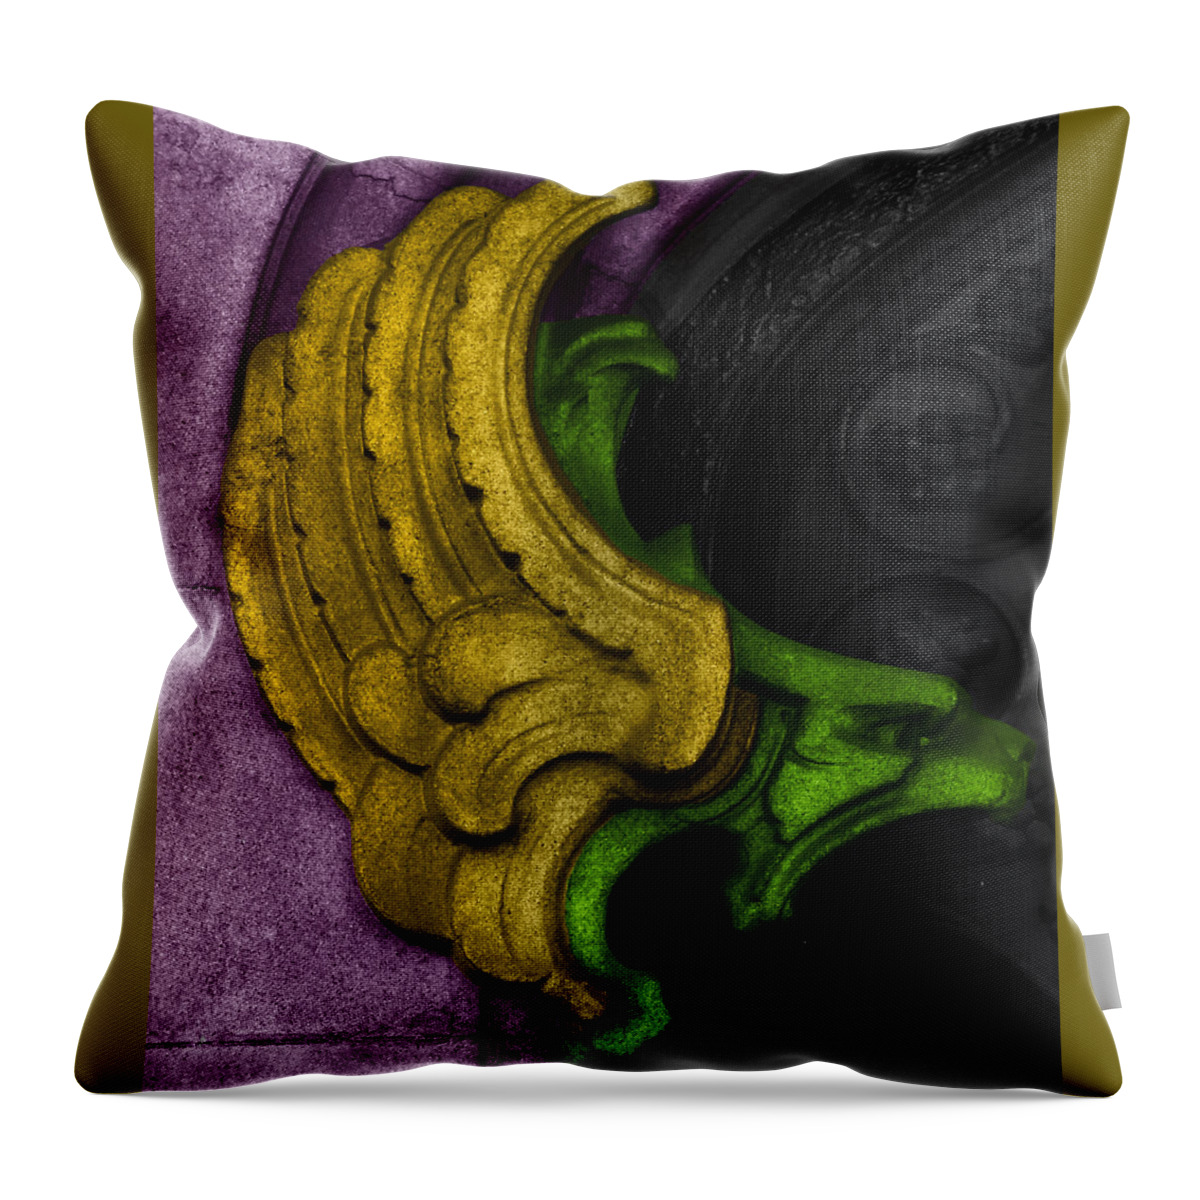 Creature Throw Pillow featuring the photograph Little creature by Emme Pons